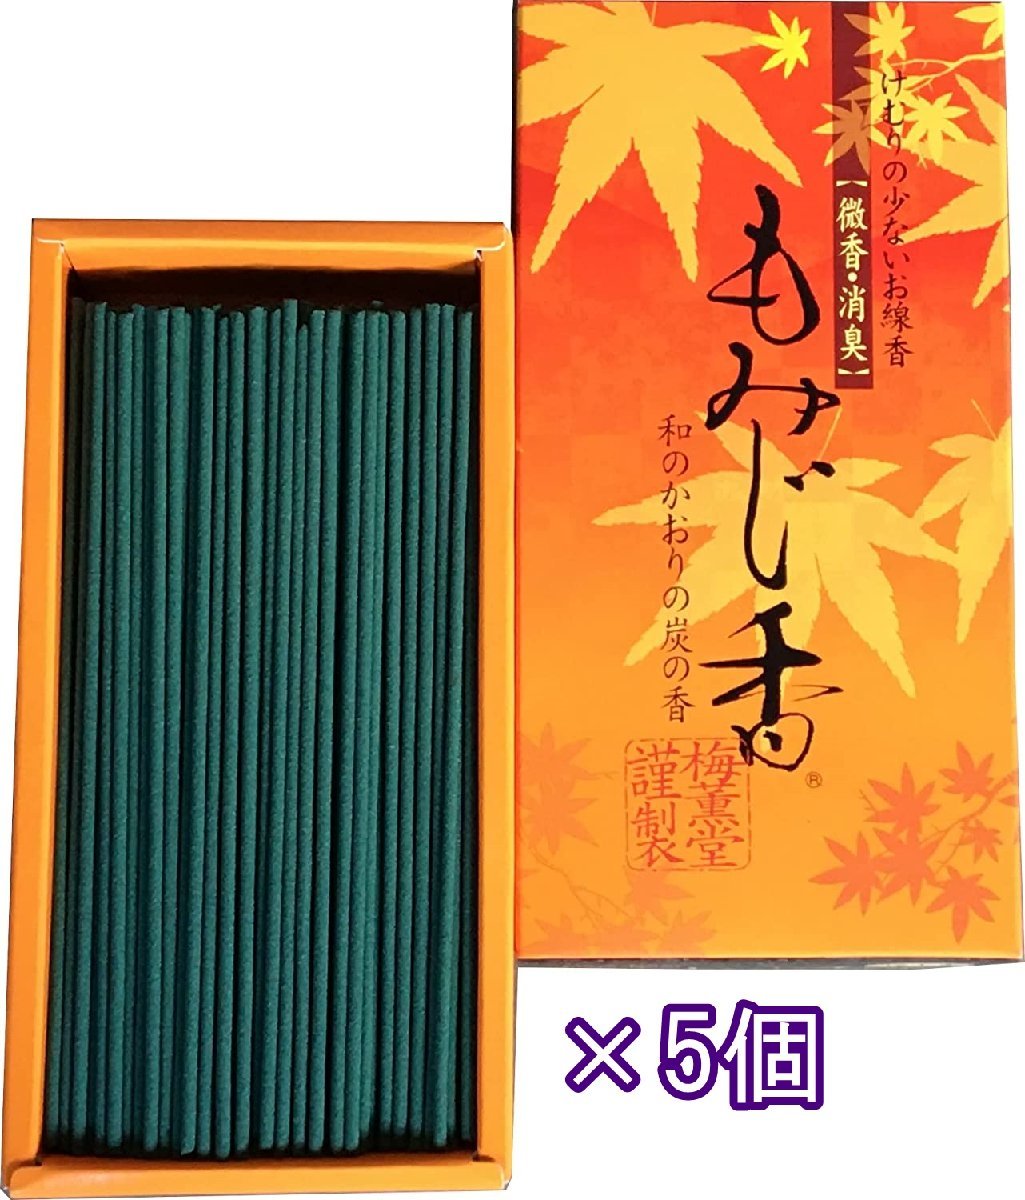  incense stick .. for gift the smallest .* deodorization maple .5 piece set ....... incense stick . thing incense stick . thing incense stick set O-Bon ..